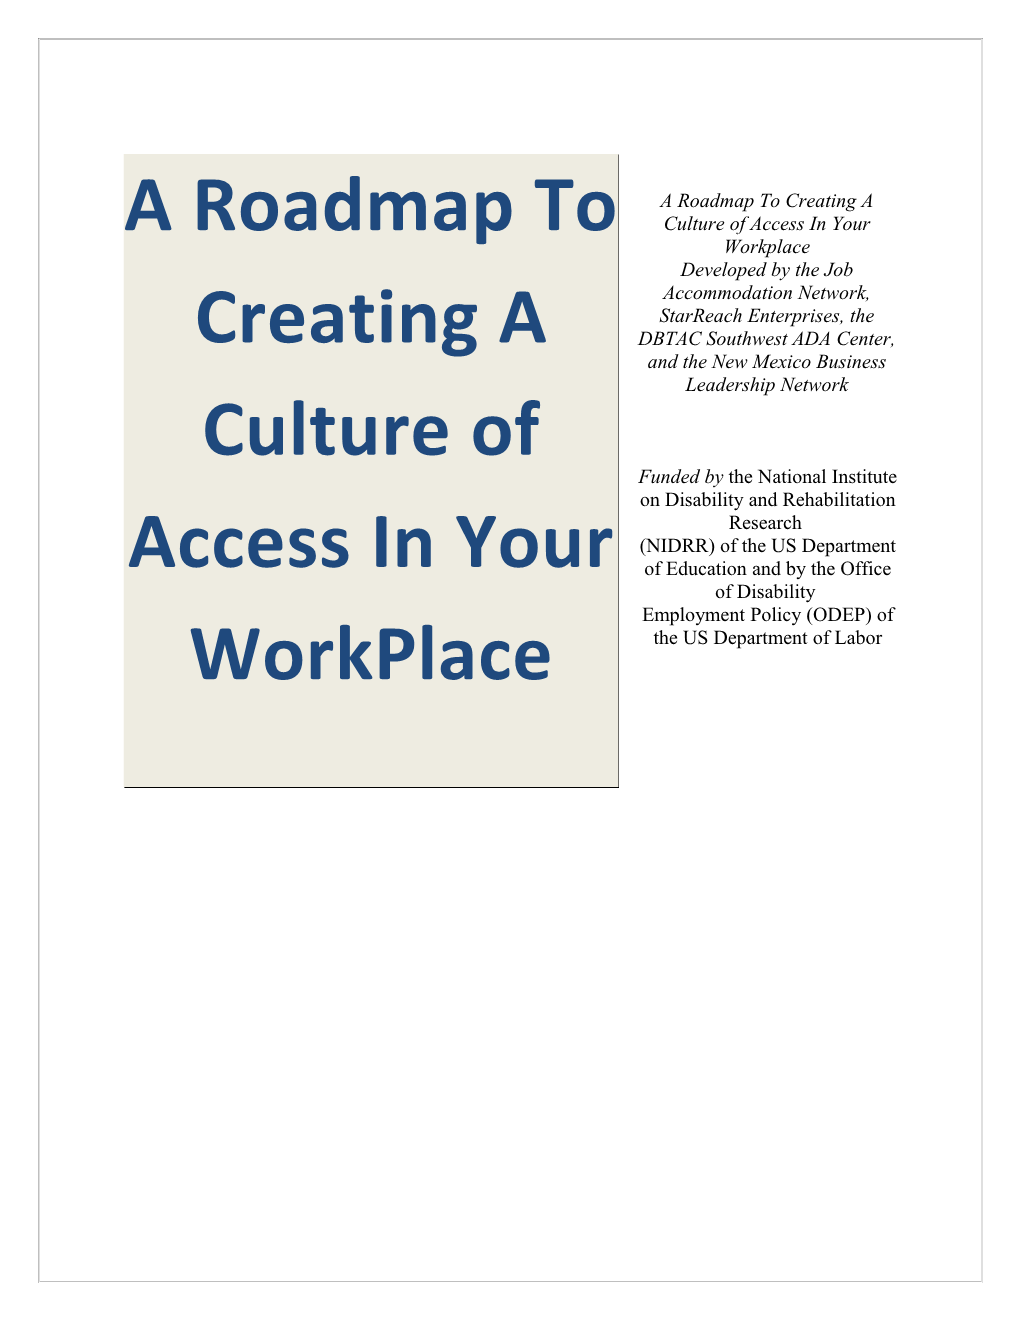 A Roadmap to Creating a Culture of Access in Your Workplace